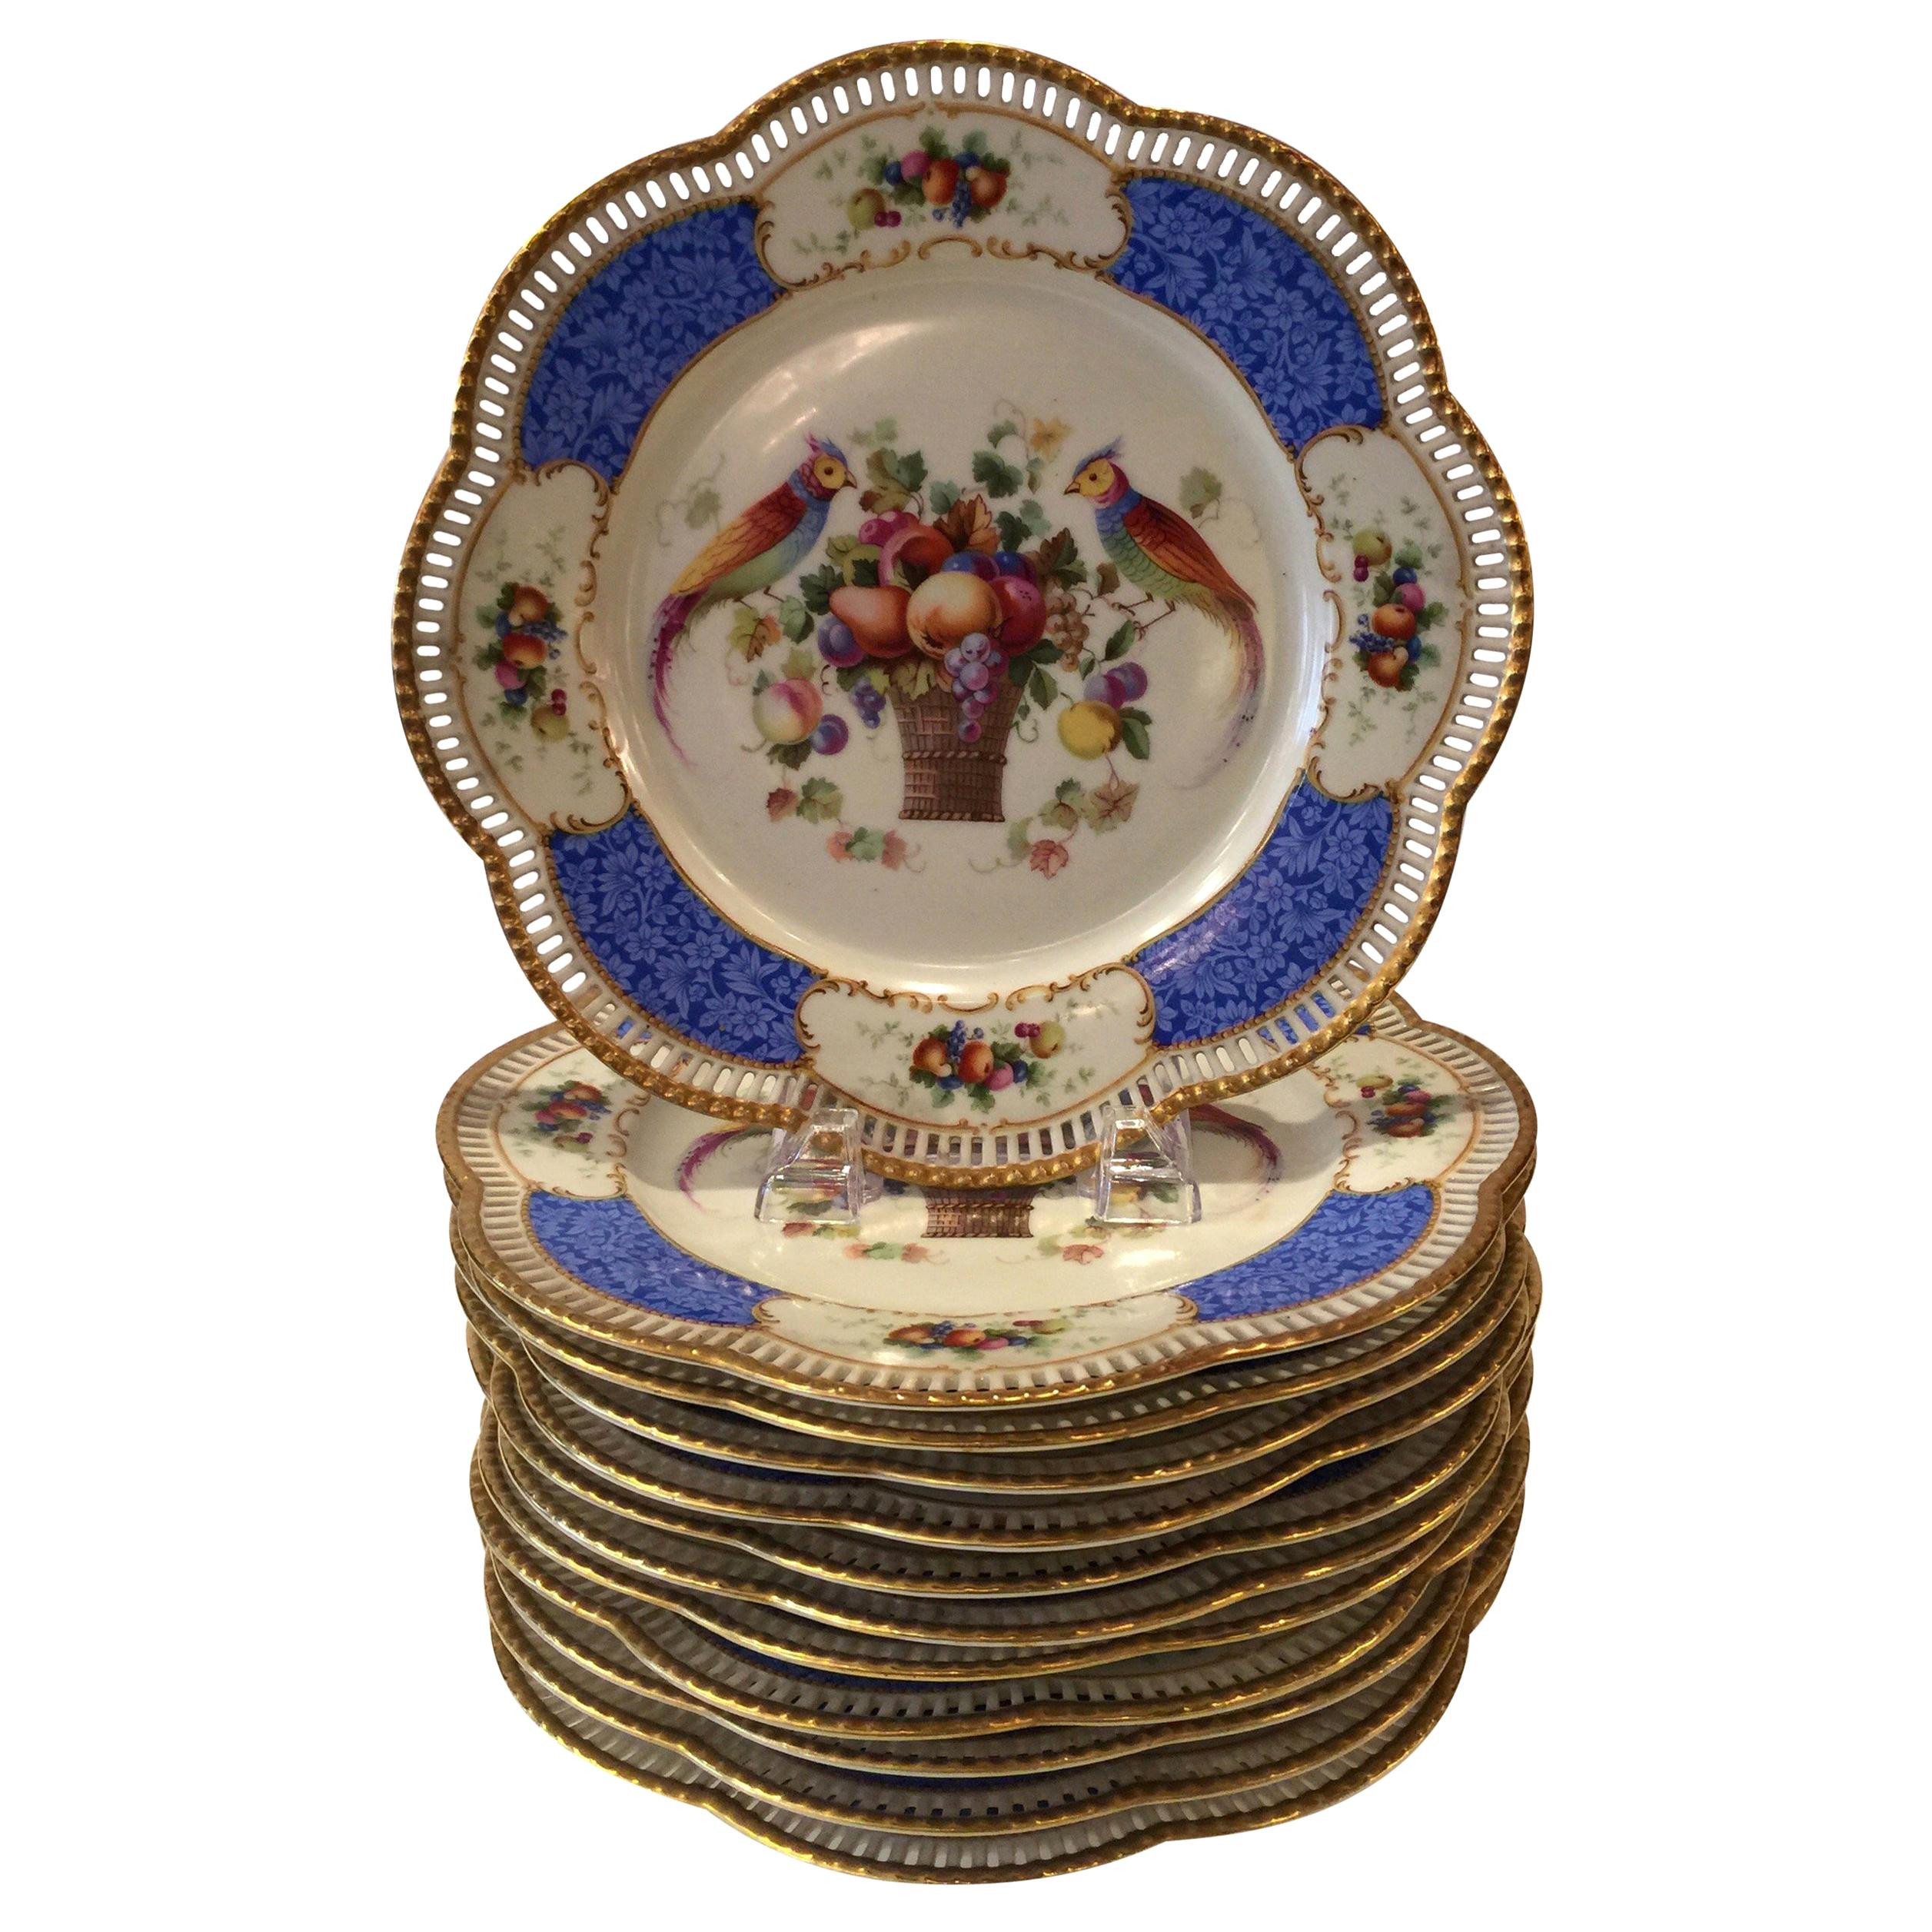 Set of Twelve Bavarian Reticulated Dinner/Service with Birds and Flowers Plates